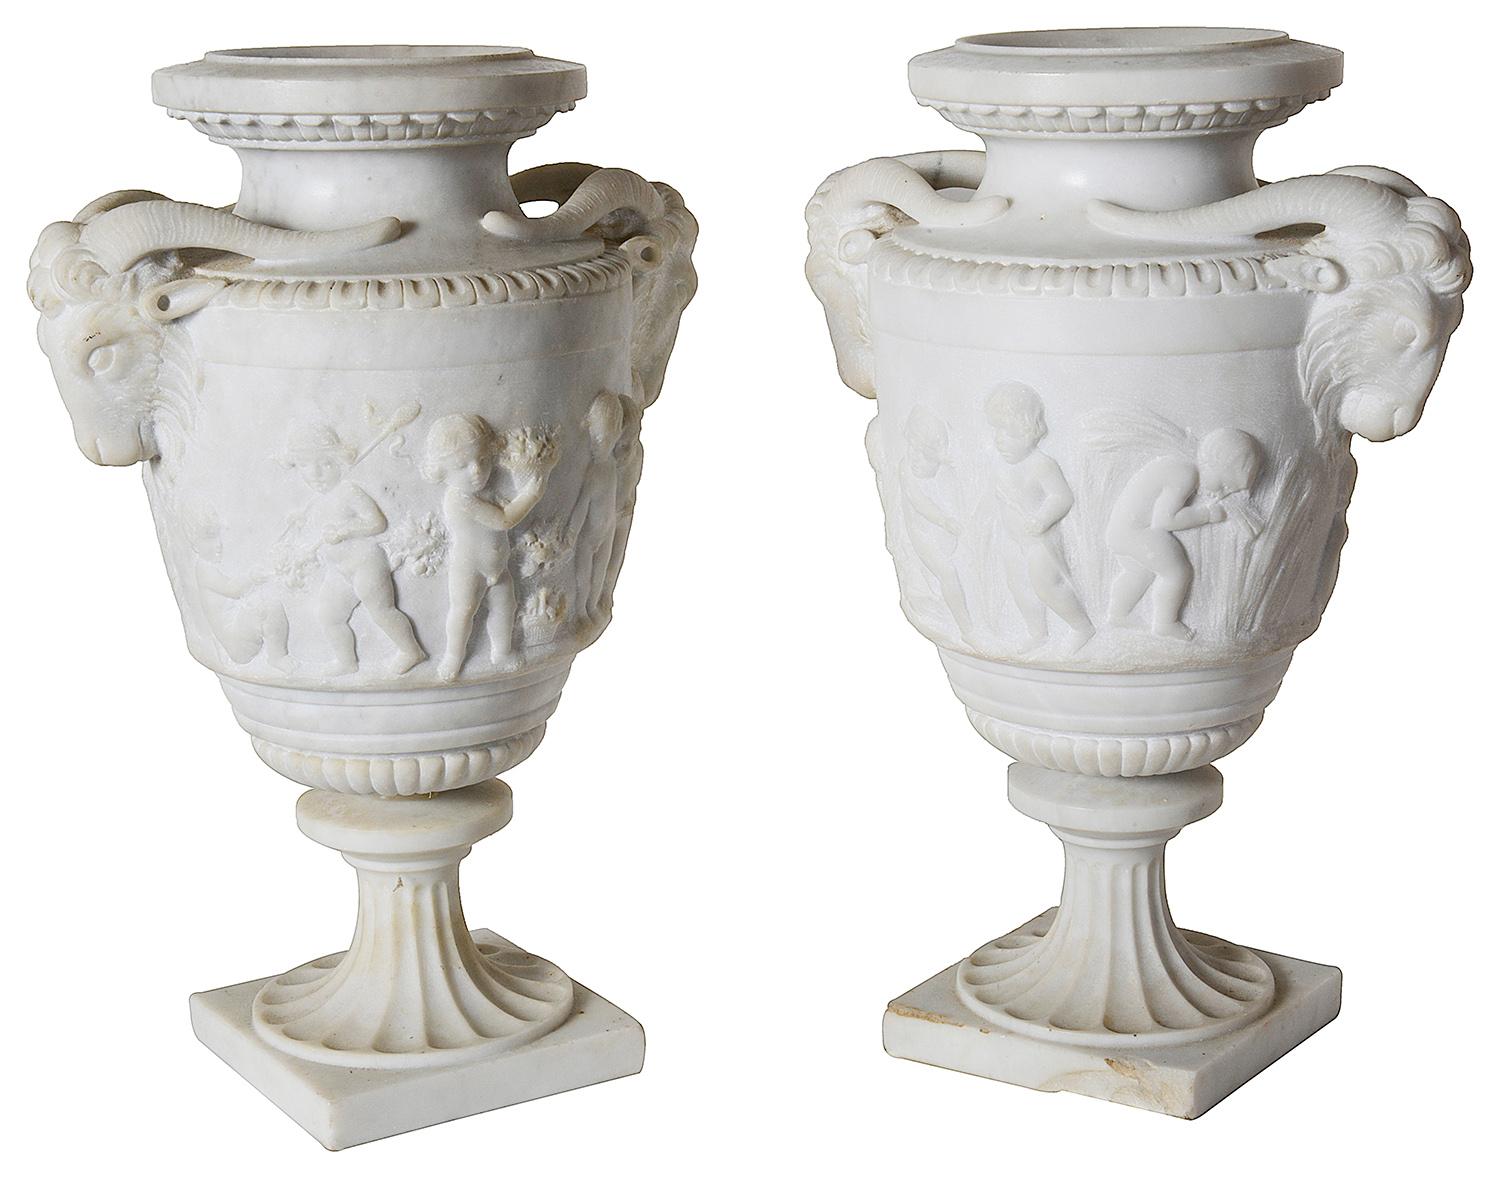 A fine quality pair of late 19th century carved Carrera marble neoclassical urns, each depicting the children gathering the harvest, flowers and with rams head handles on either side.